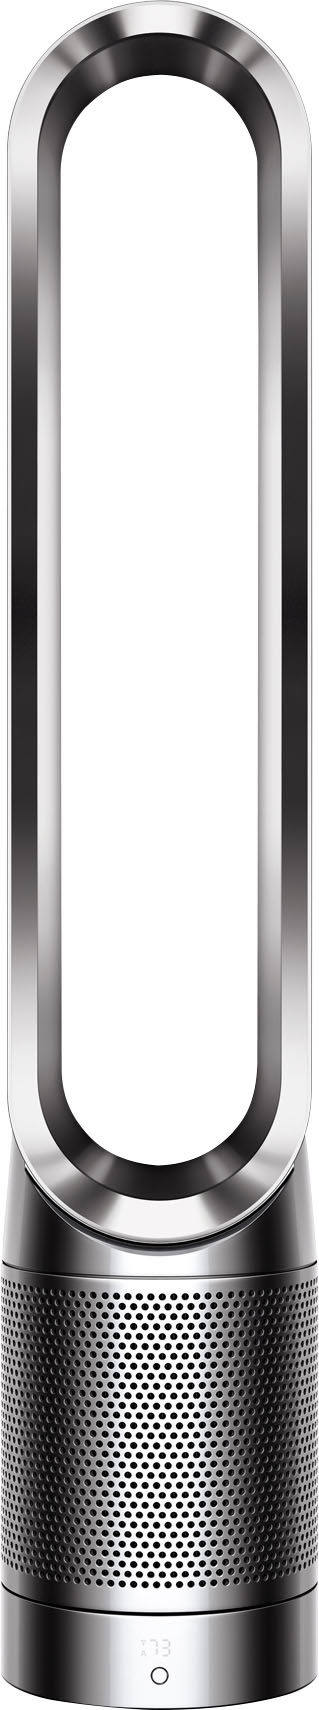 Best Buy: Dyson Pure Cool Link TP02 Smart Tower Air Purifier and ...